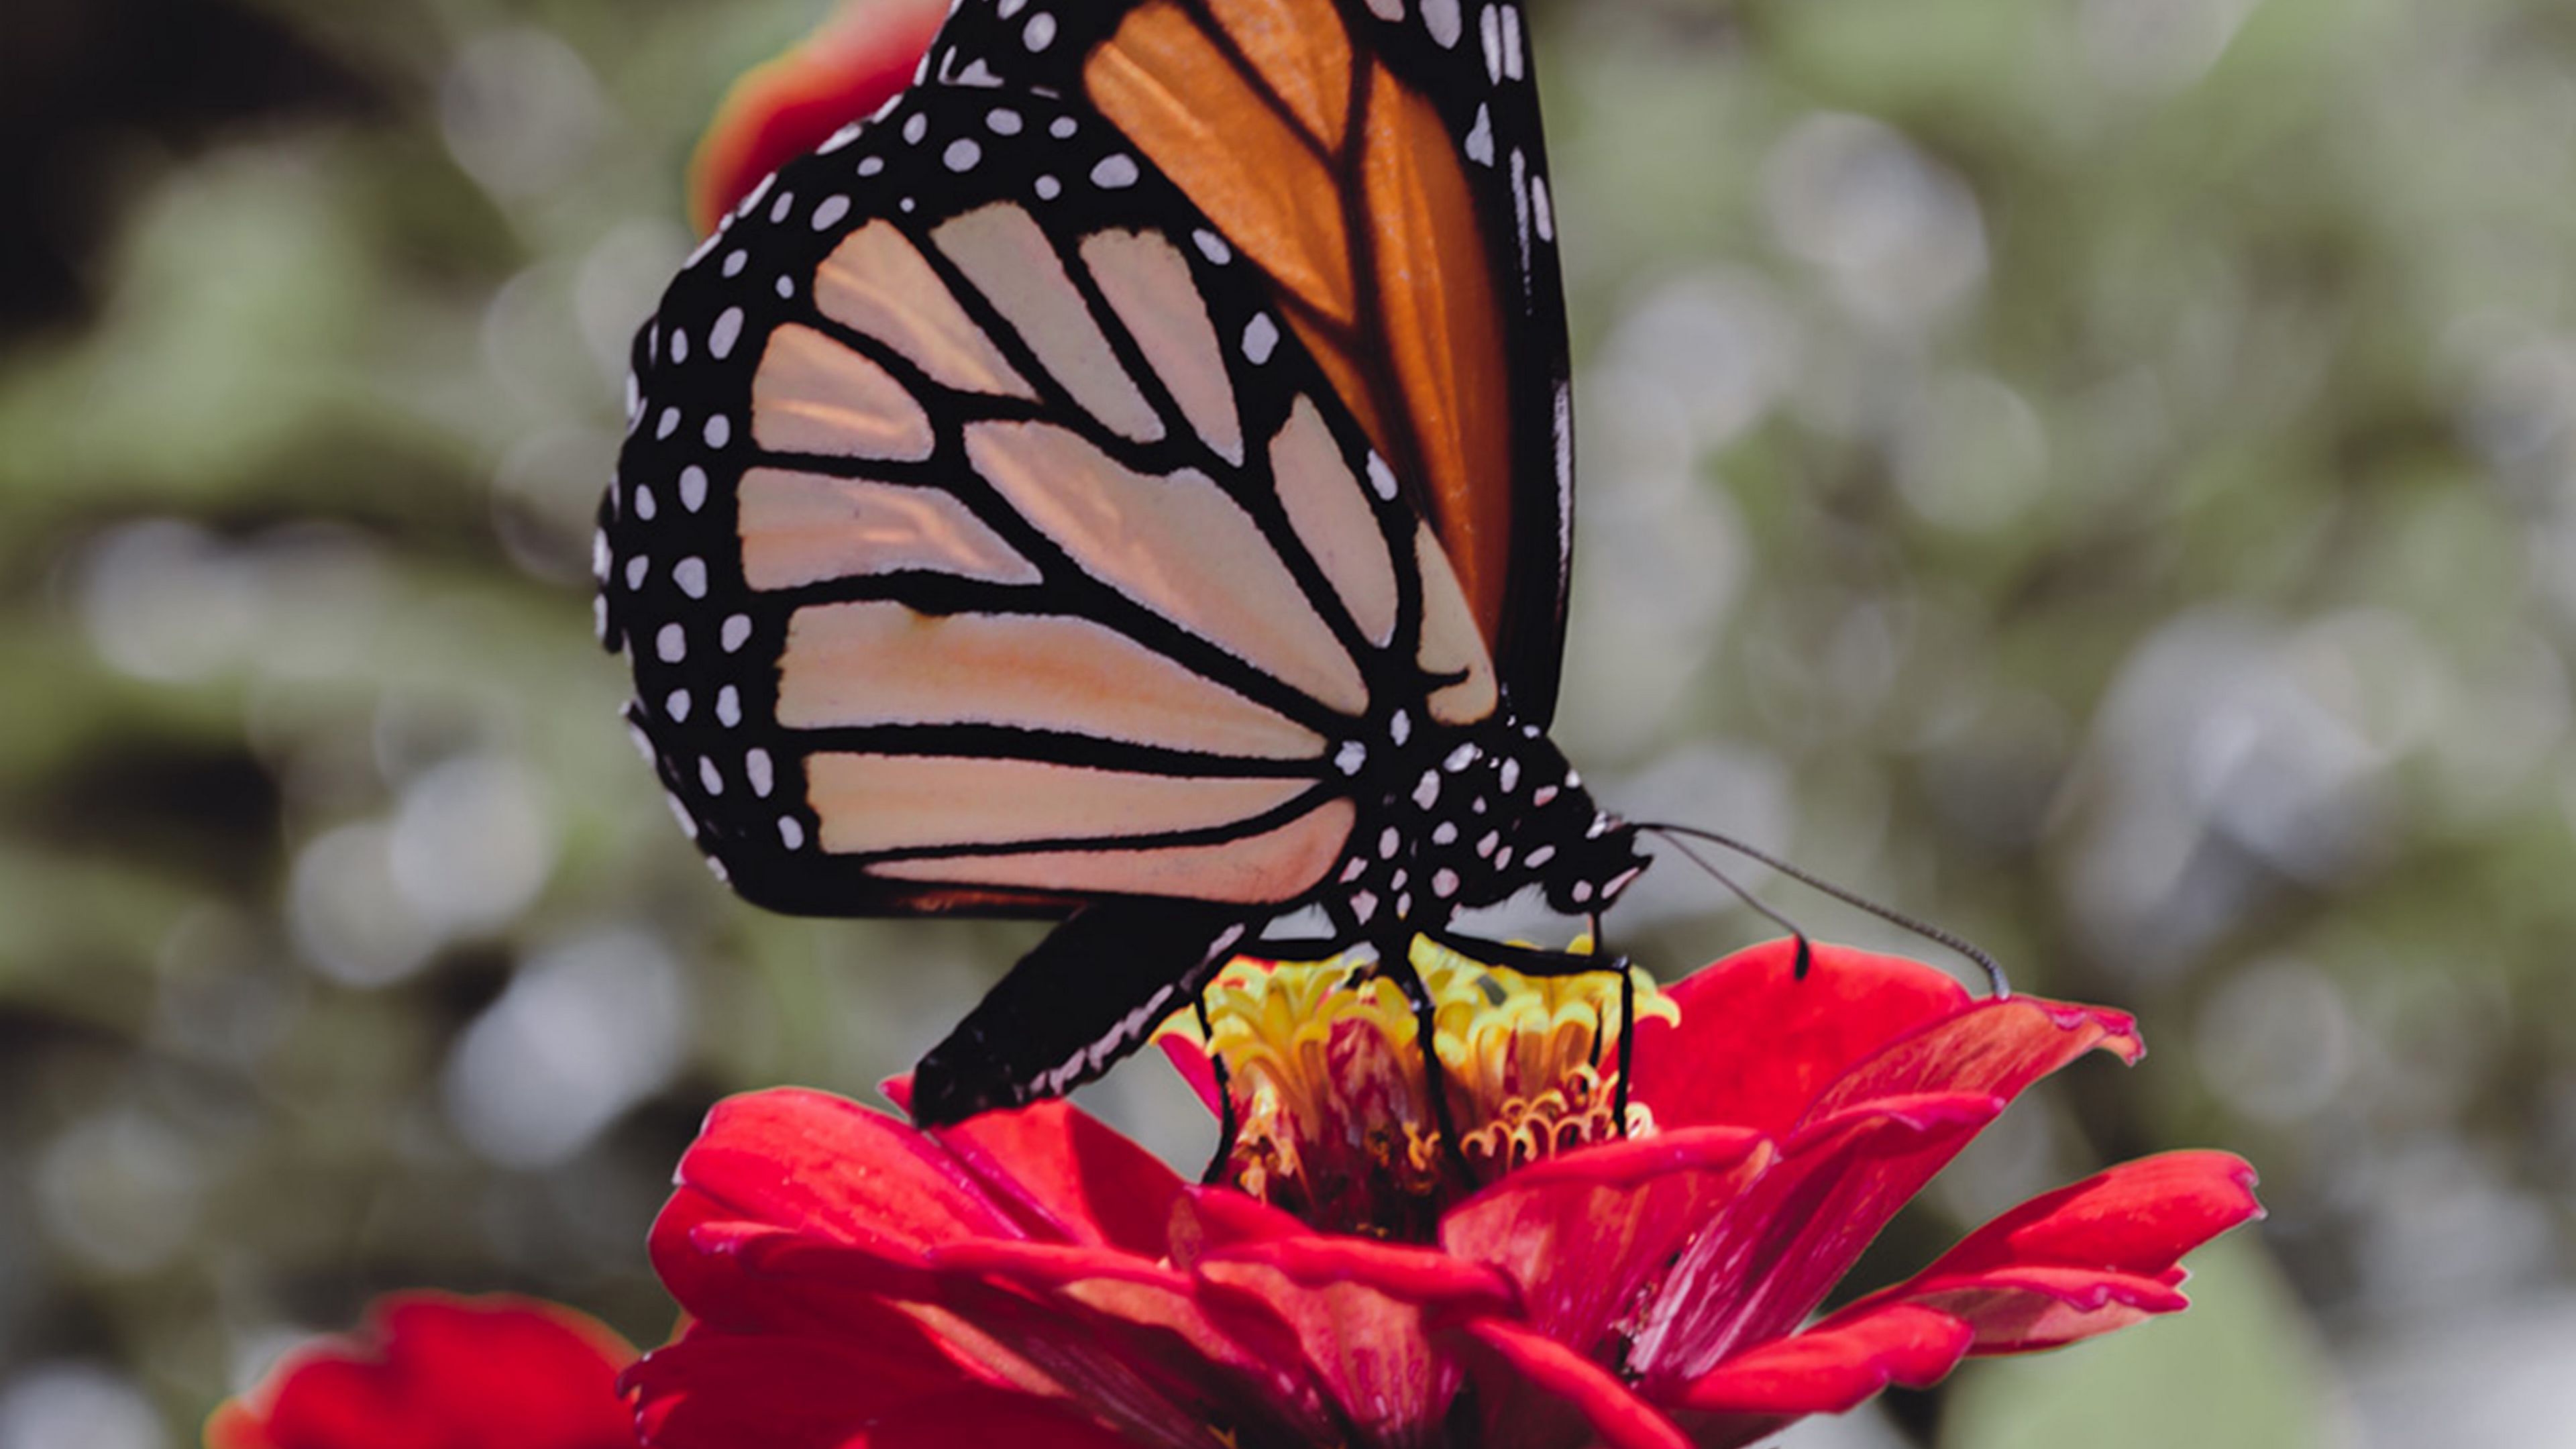 A butterfly eats nectar sitting on the petals of a flower